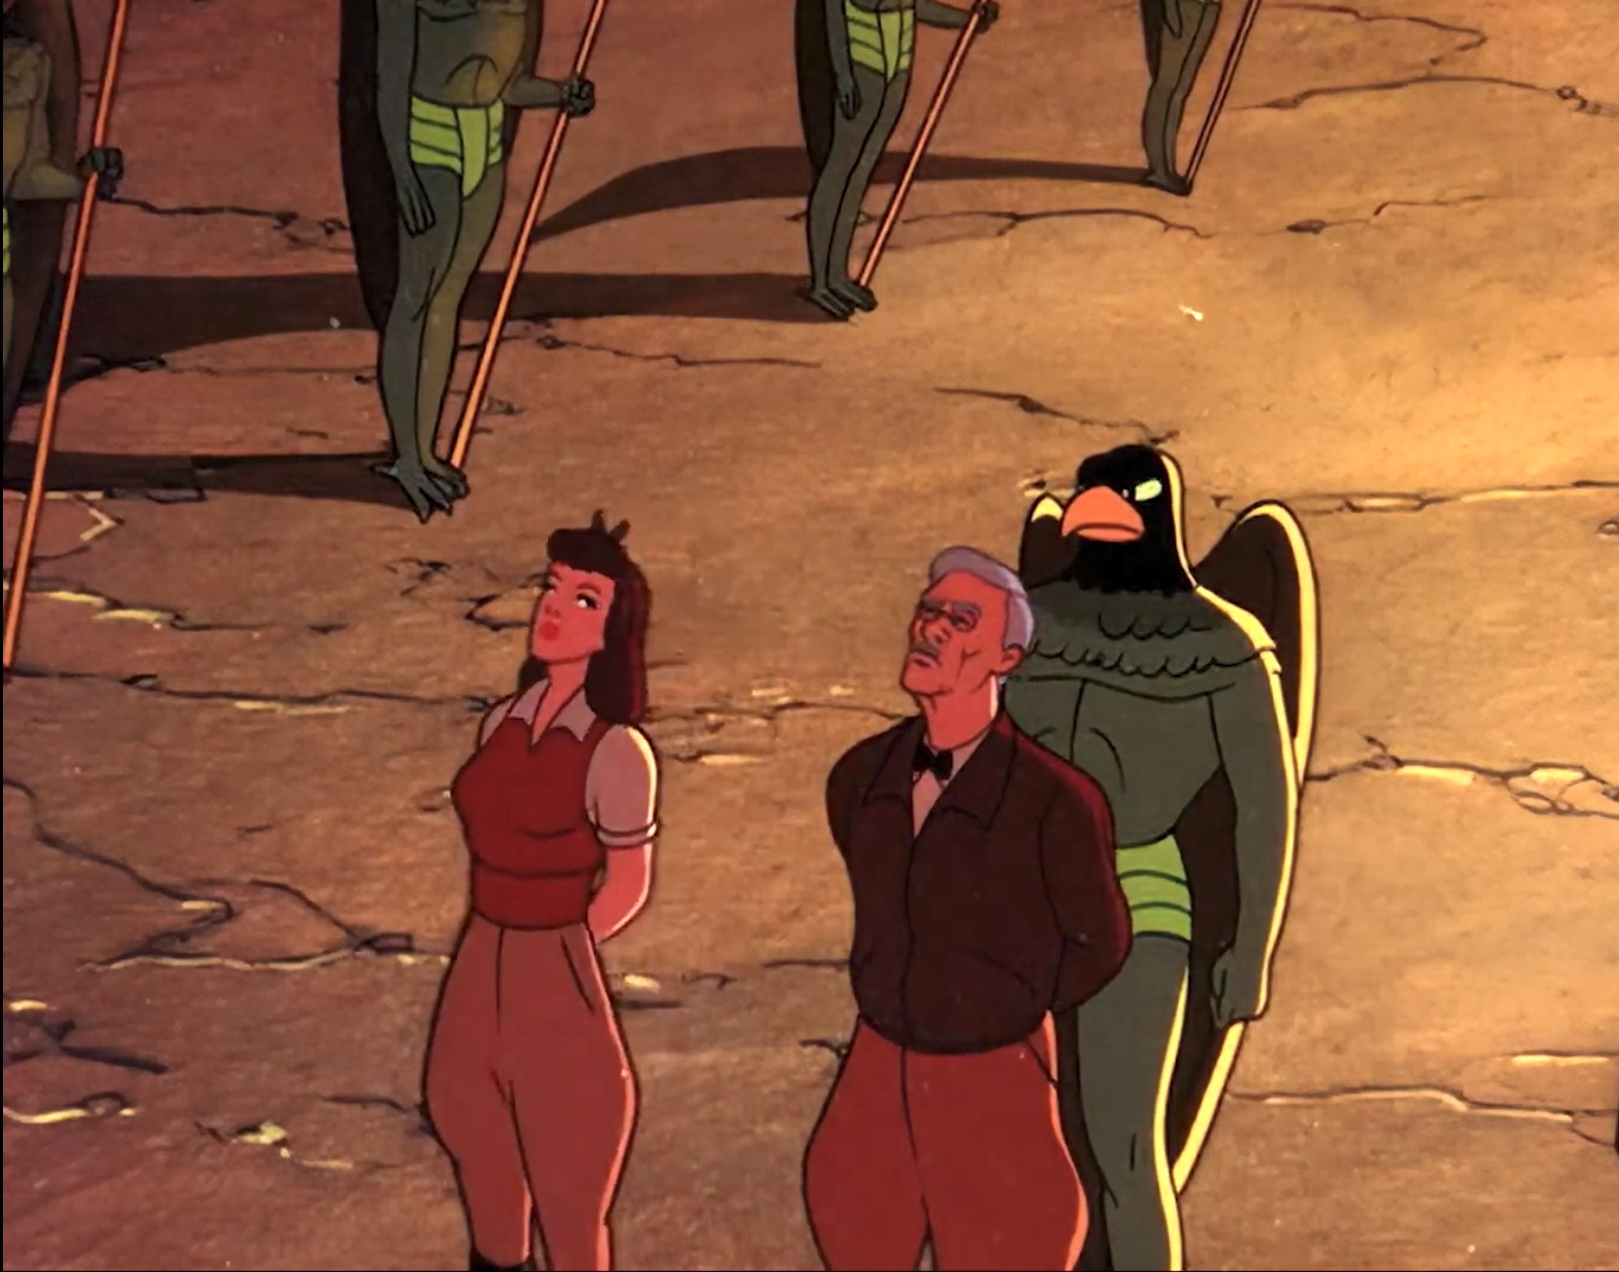 Lois and the professor captured by hawk men in "The Underground World"